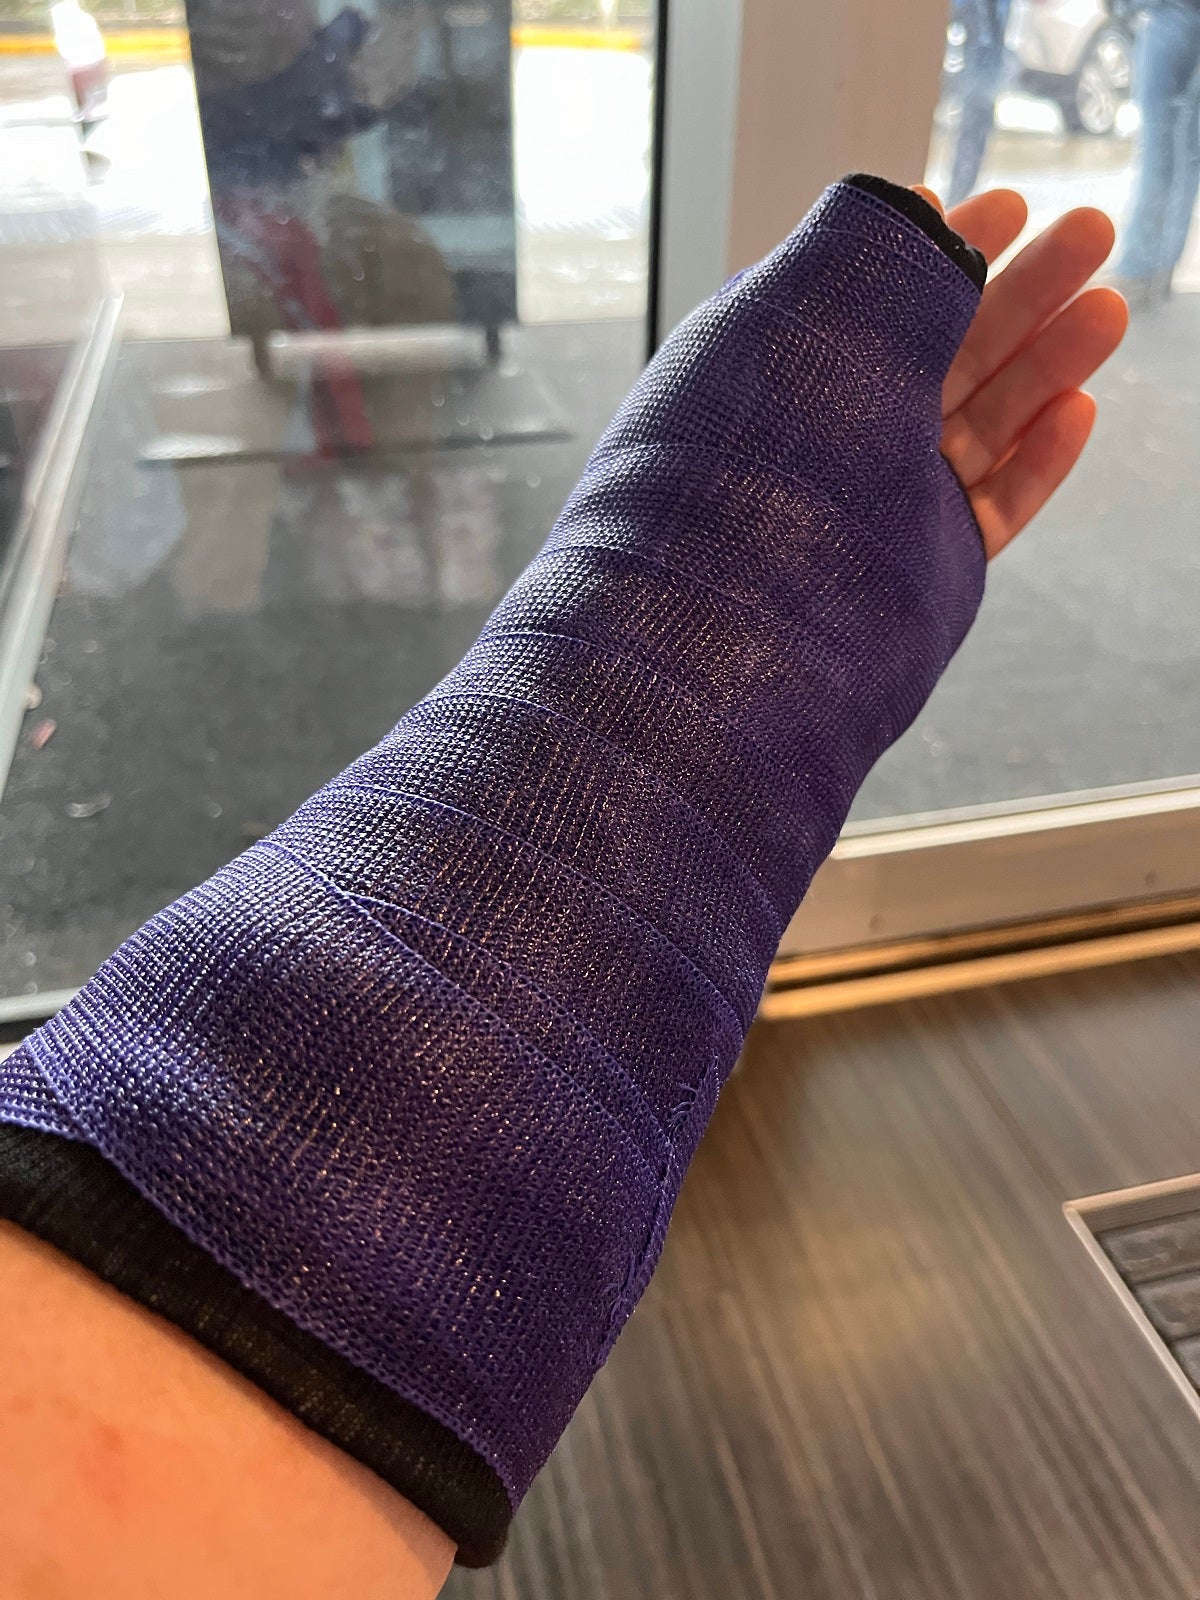 Can You Pilot an Aircraft While Wearing a Cast?